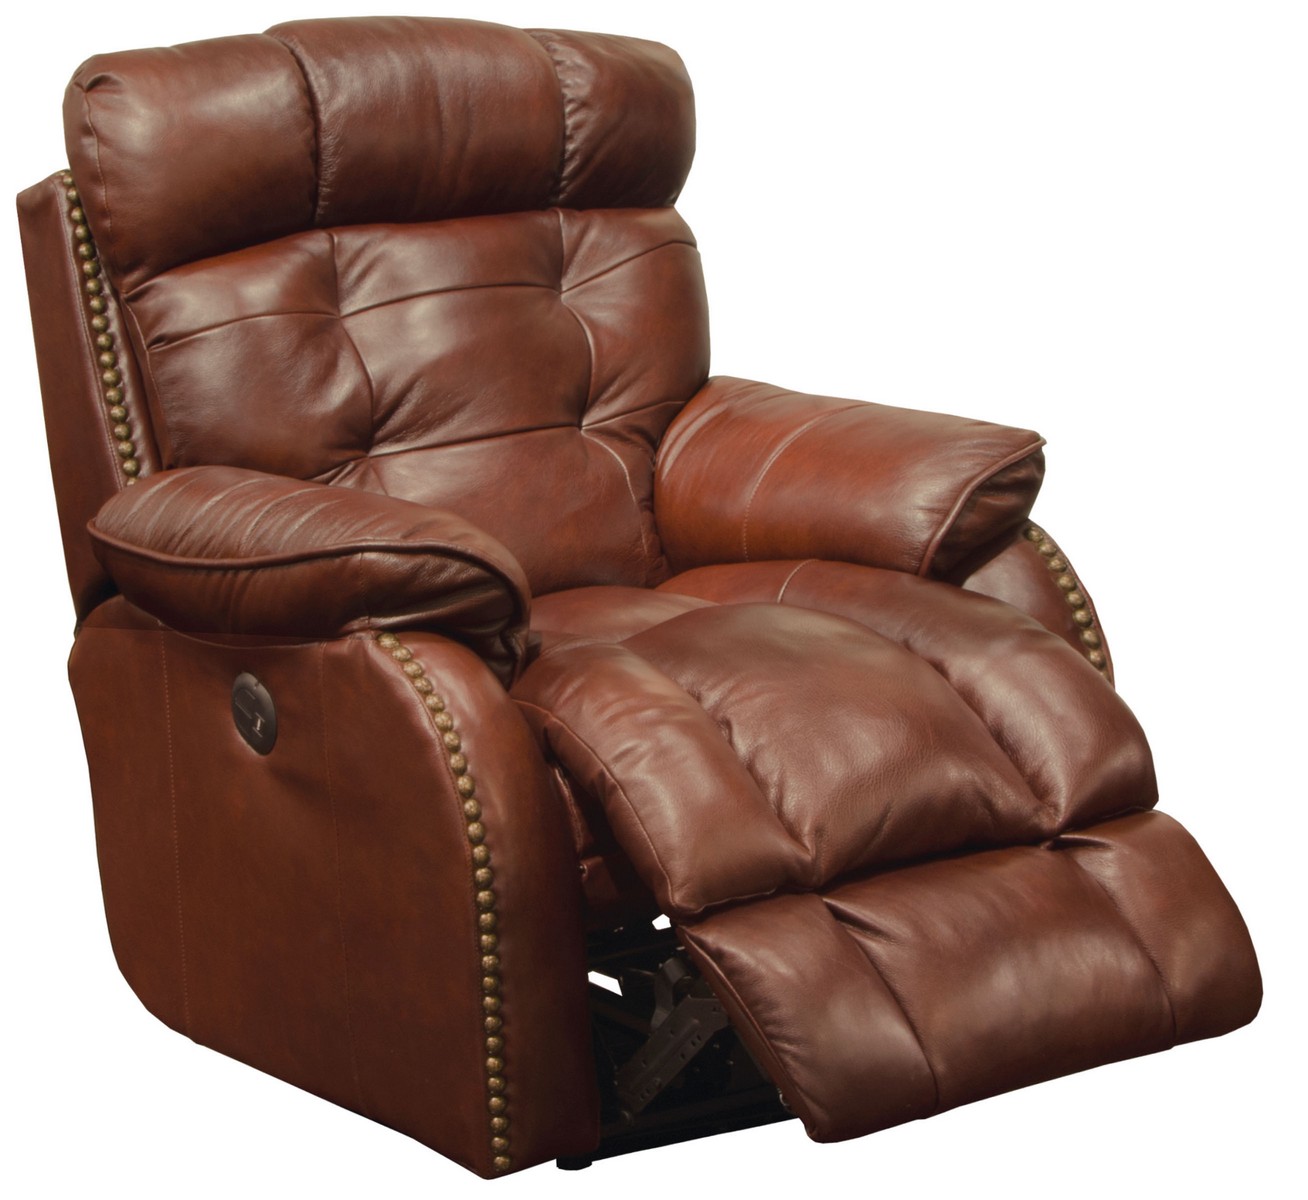 CatNapper Patterson Top Grain Leather Touch Power Lay Flat Recliner - Walnut